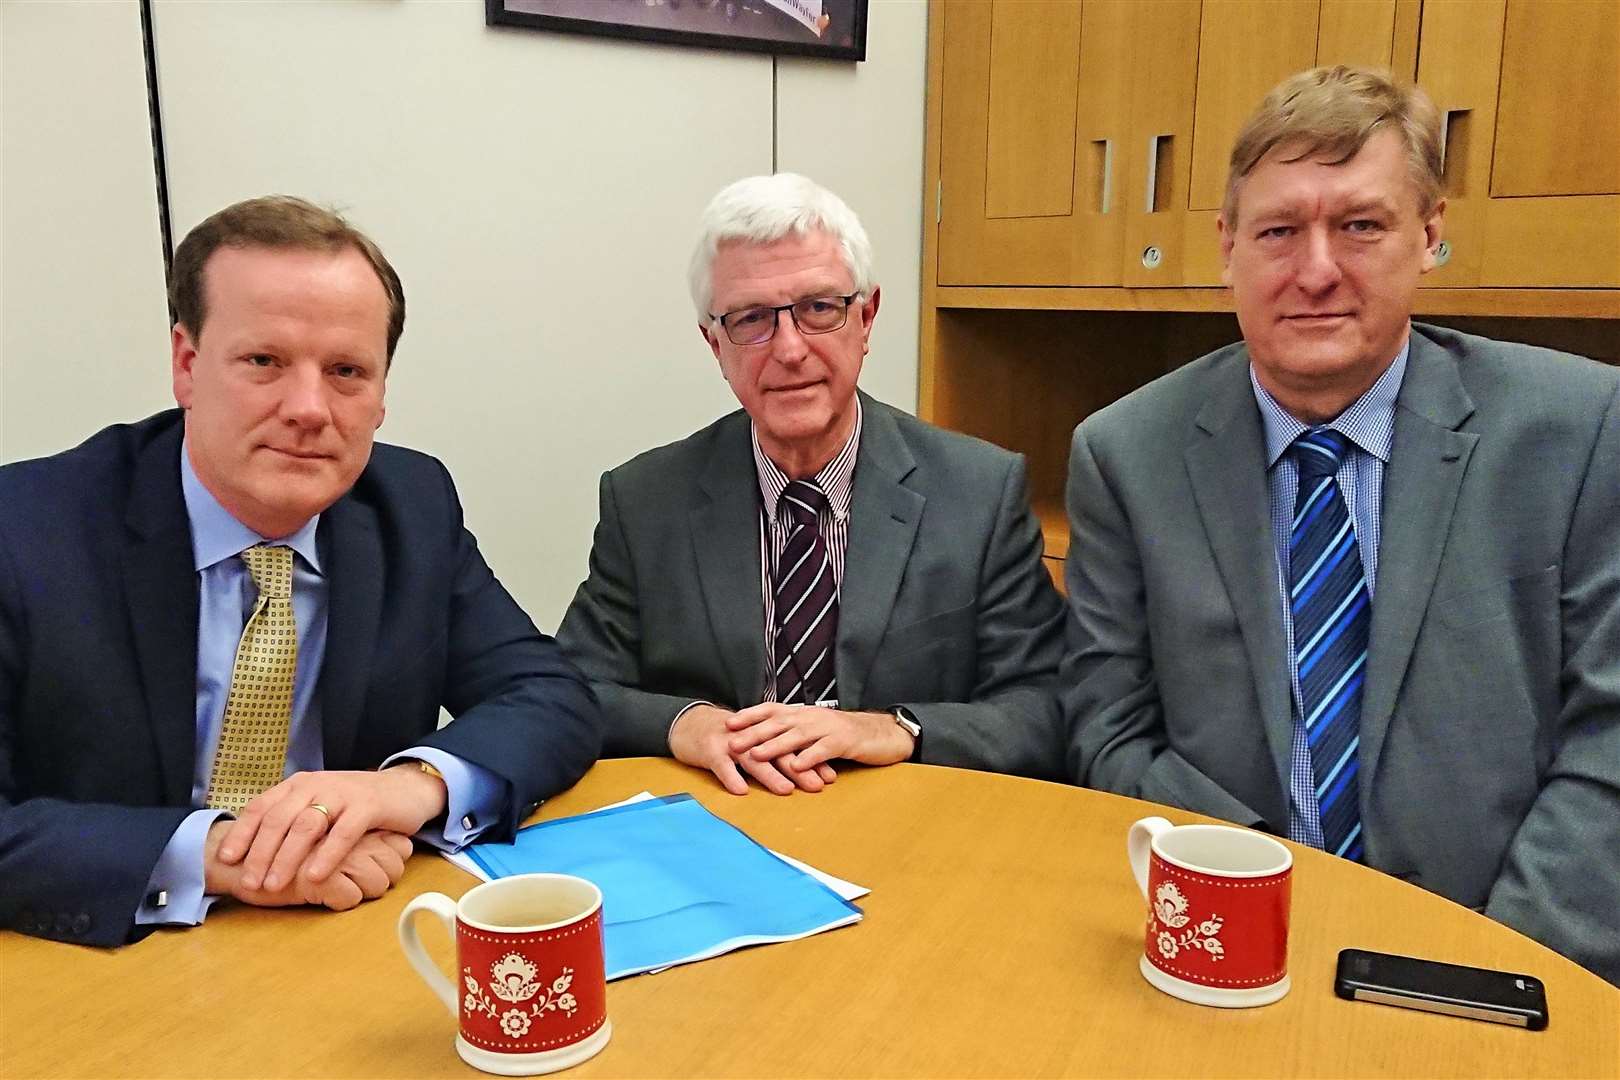 Deal MP Charlie Elphicke and Dover District Council leader Keith Morris with M&S head of public affairs Tony Ginty (centre)